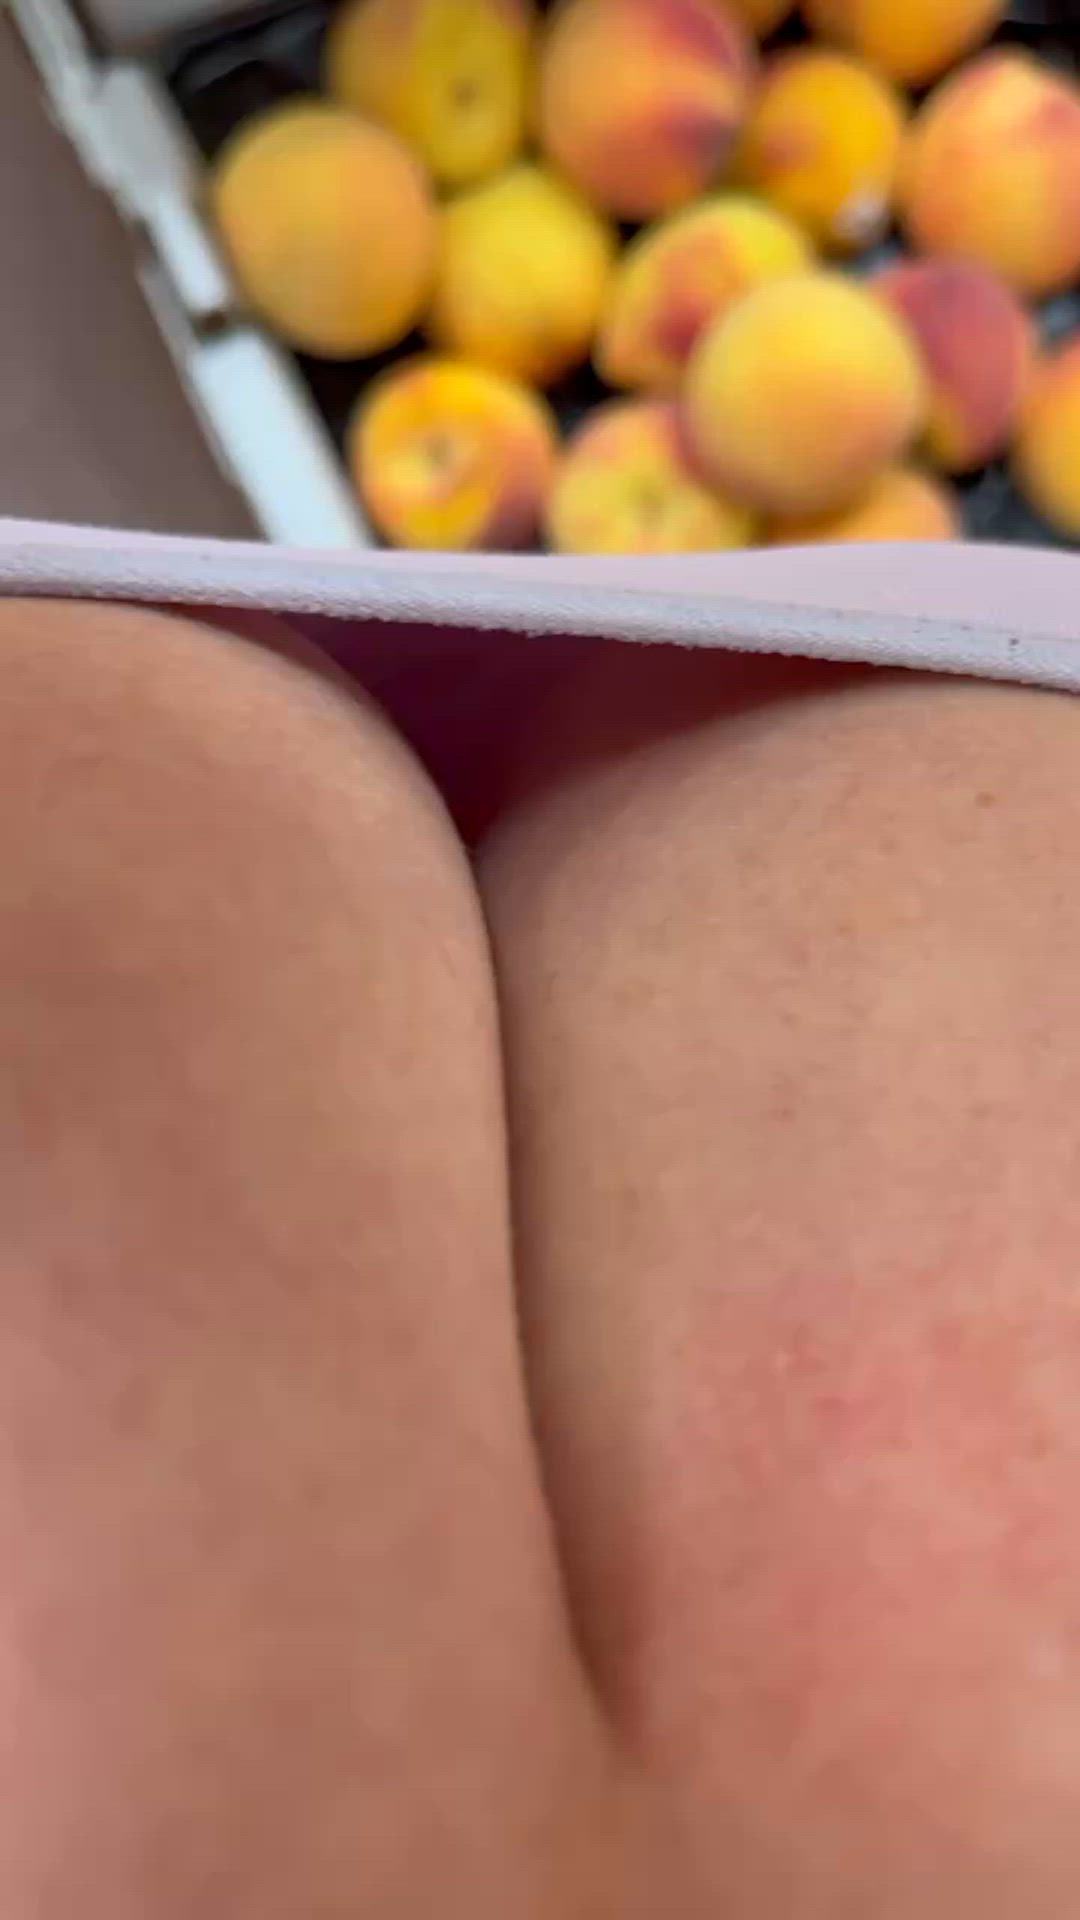 Big Tits porn video with onlyfans model mimimariecoxshire <strong>@mimi_marie_coxshire</strong>